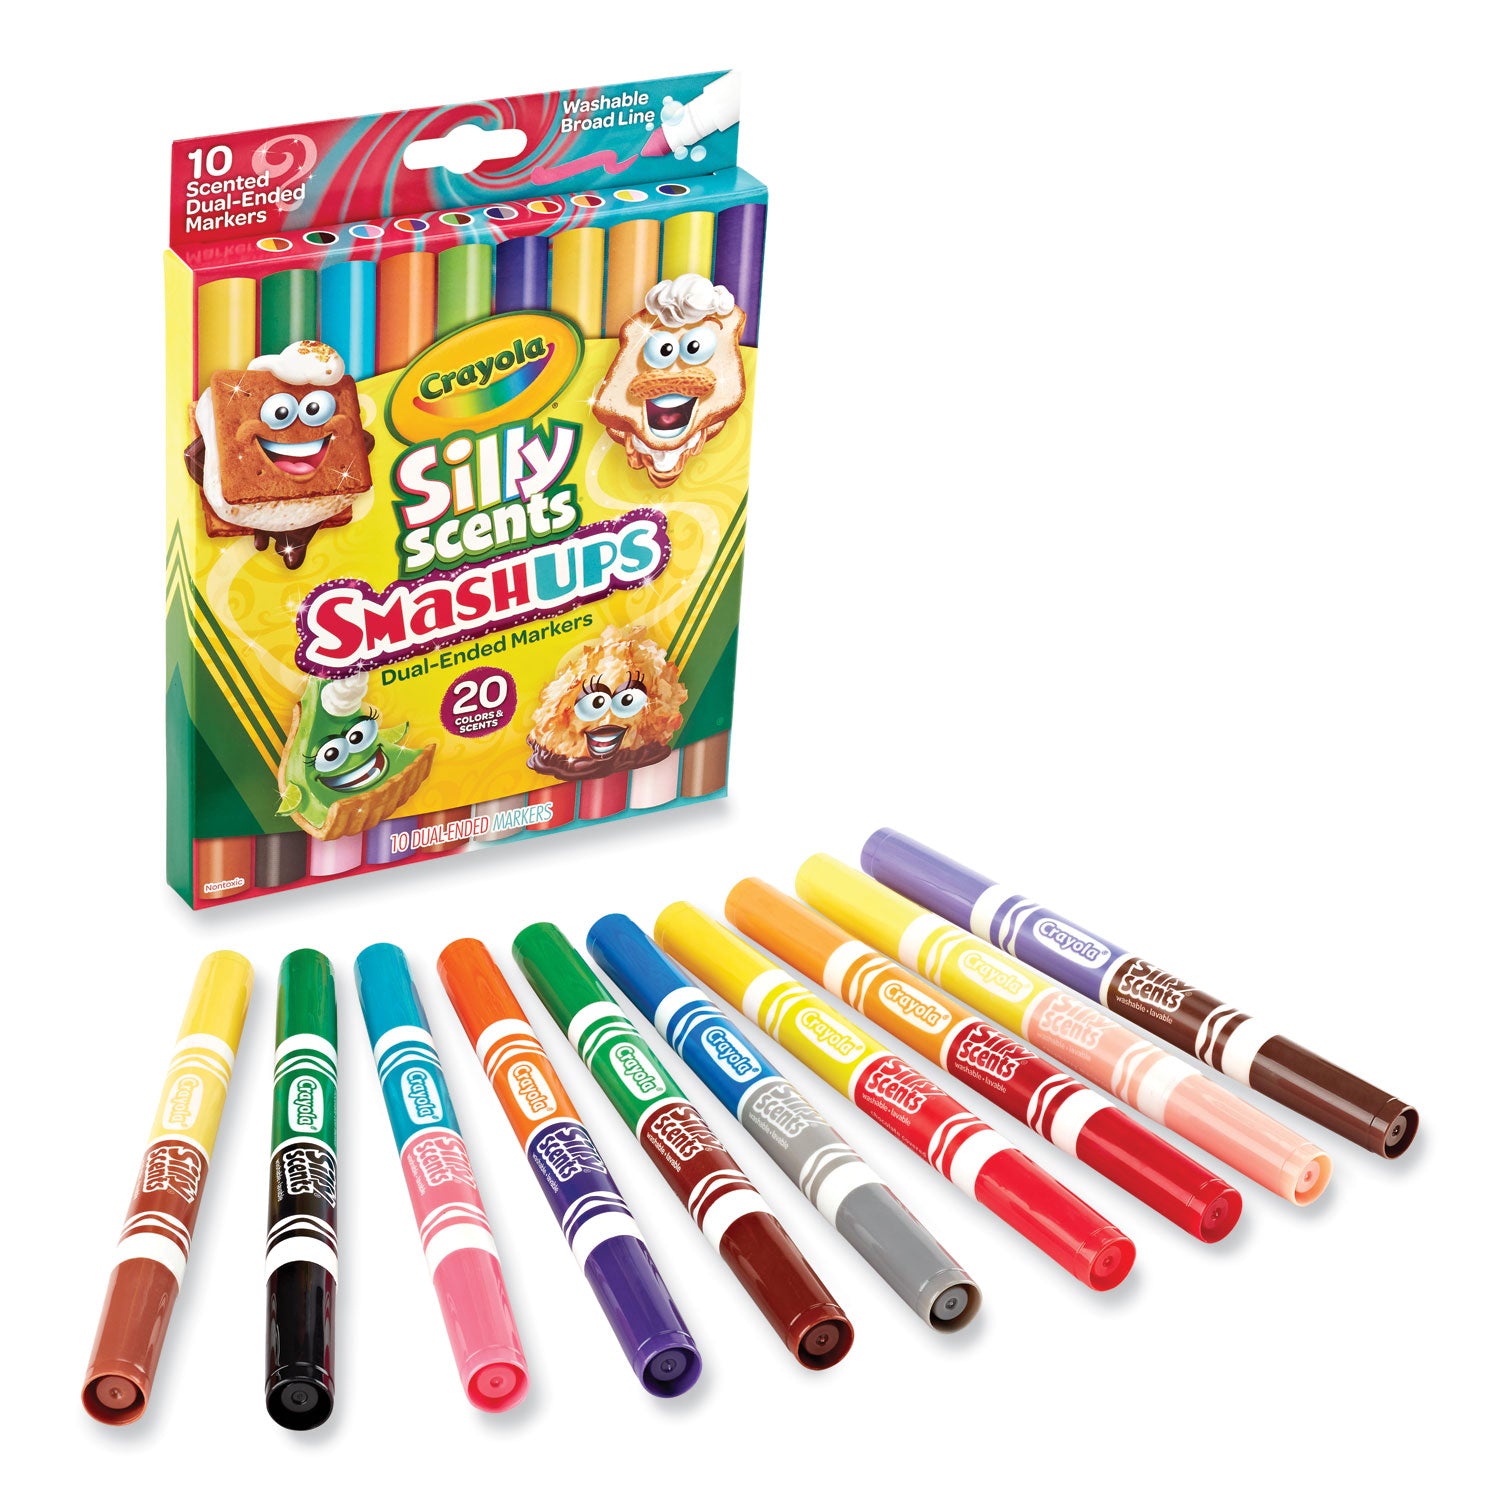 silly-scents-smash-up-dual-ended-markers-broad-tip-assorted-10-pack_cyo588342 - 5